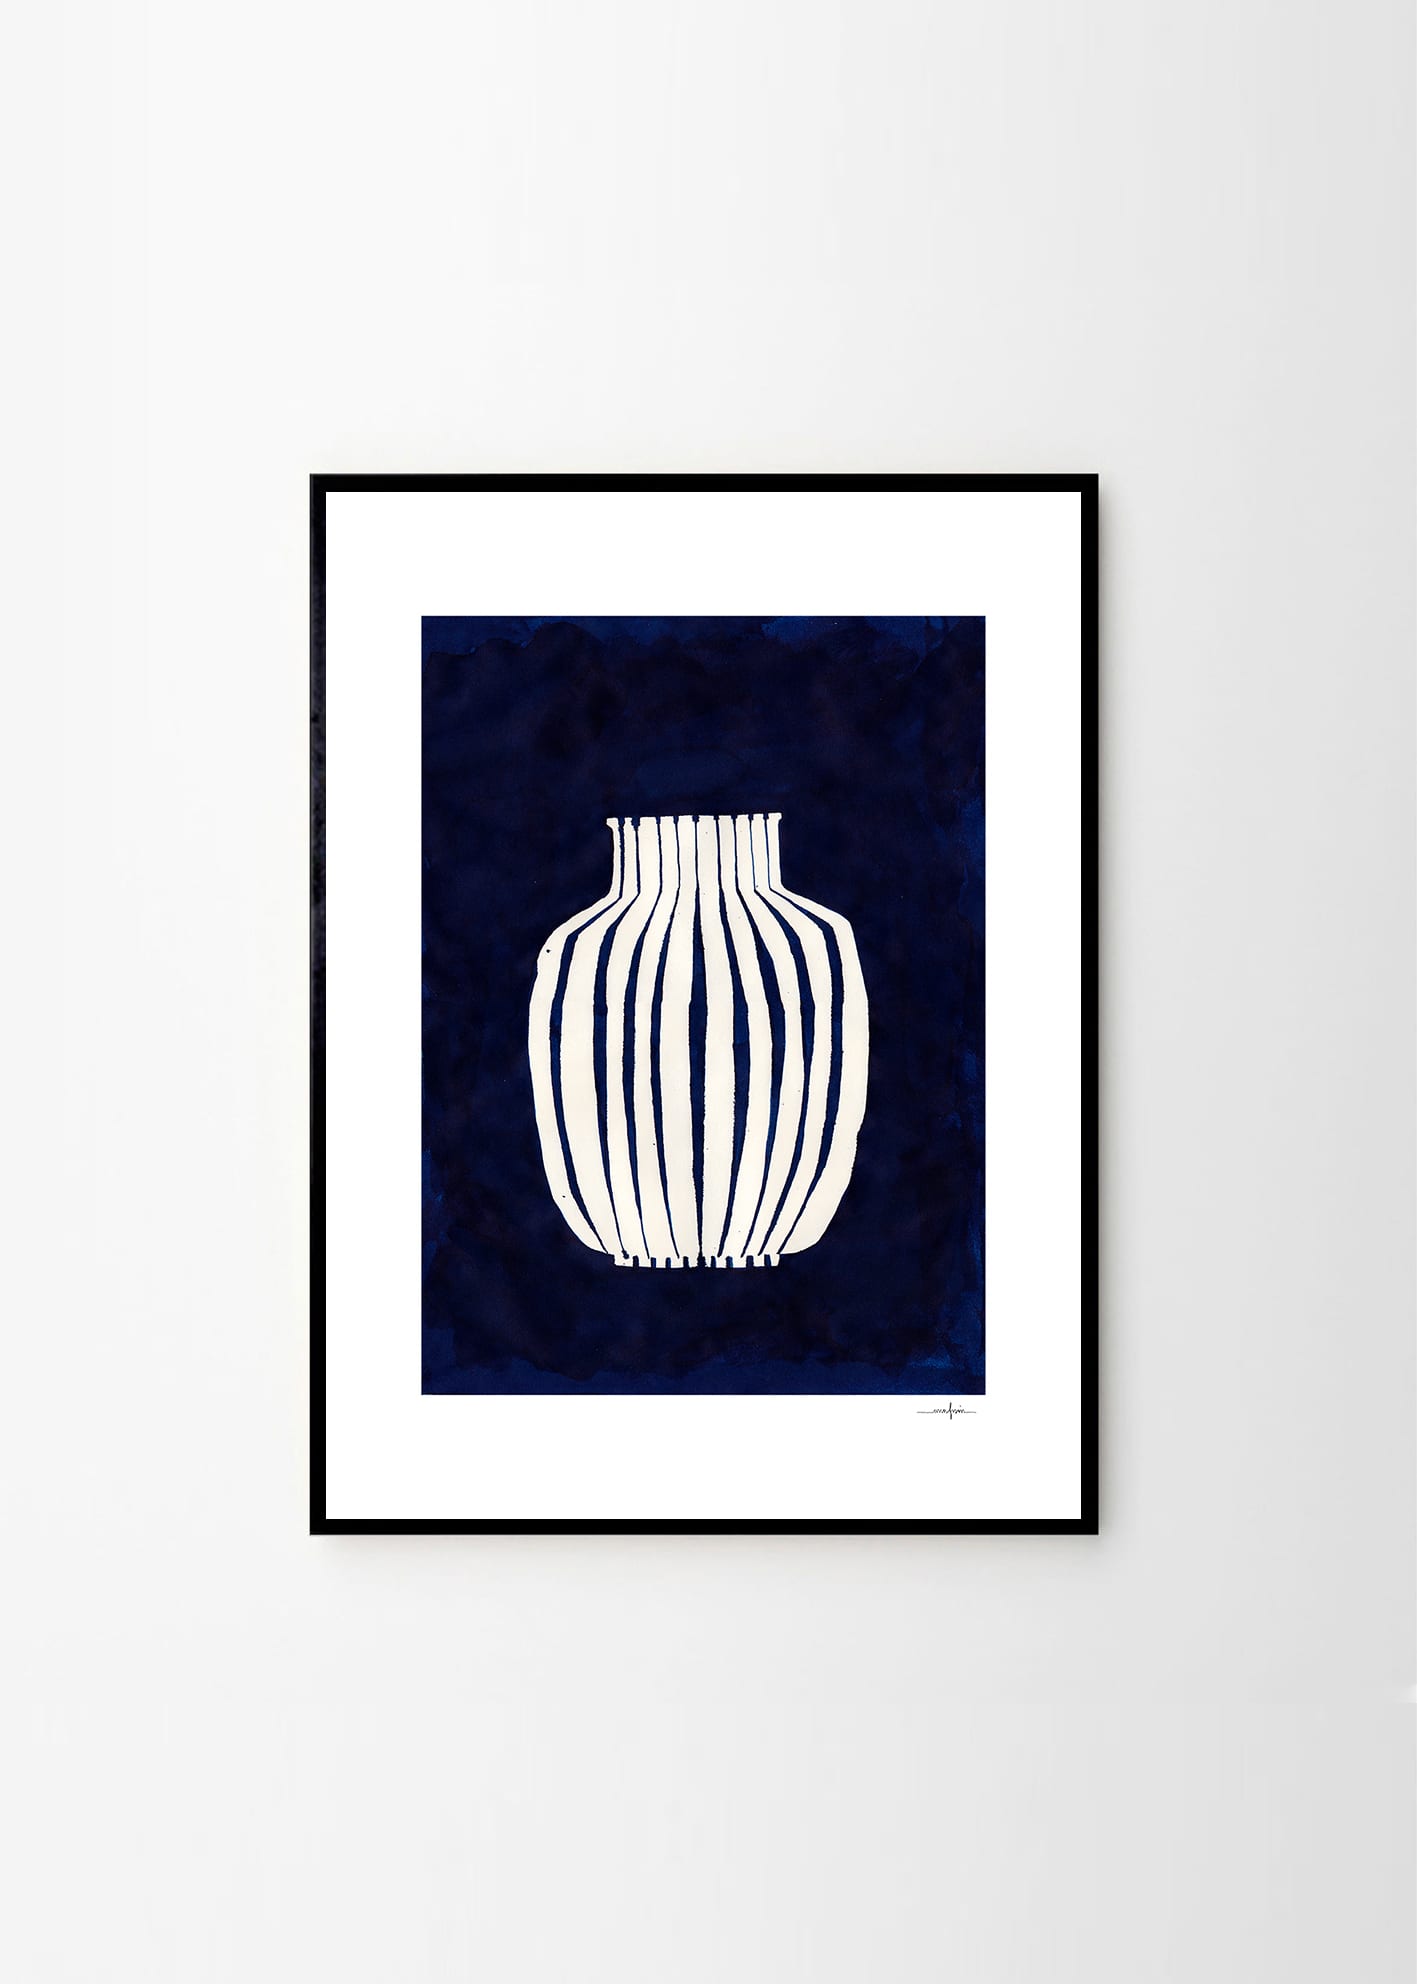 Ana Vase art - Blue THE Frois, print POSTER CLUB